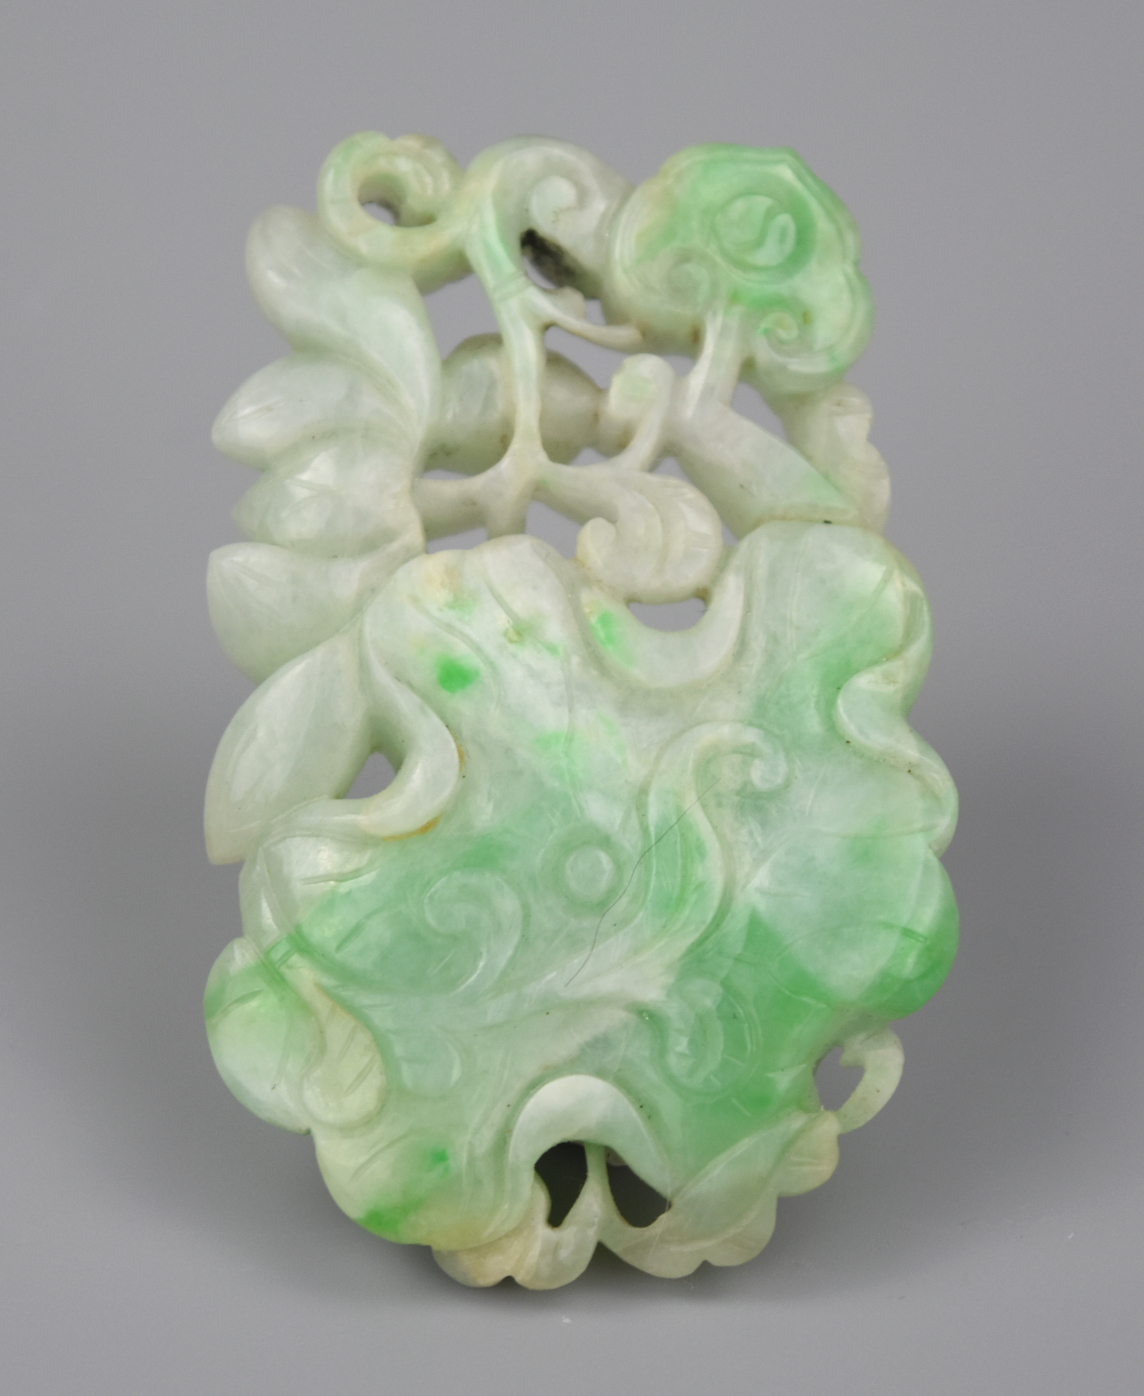 A CHINESE CARVED JADEITE PENDANT 2cf46d